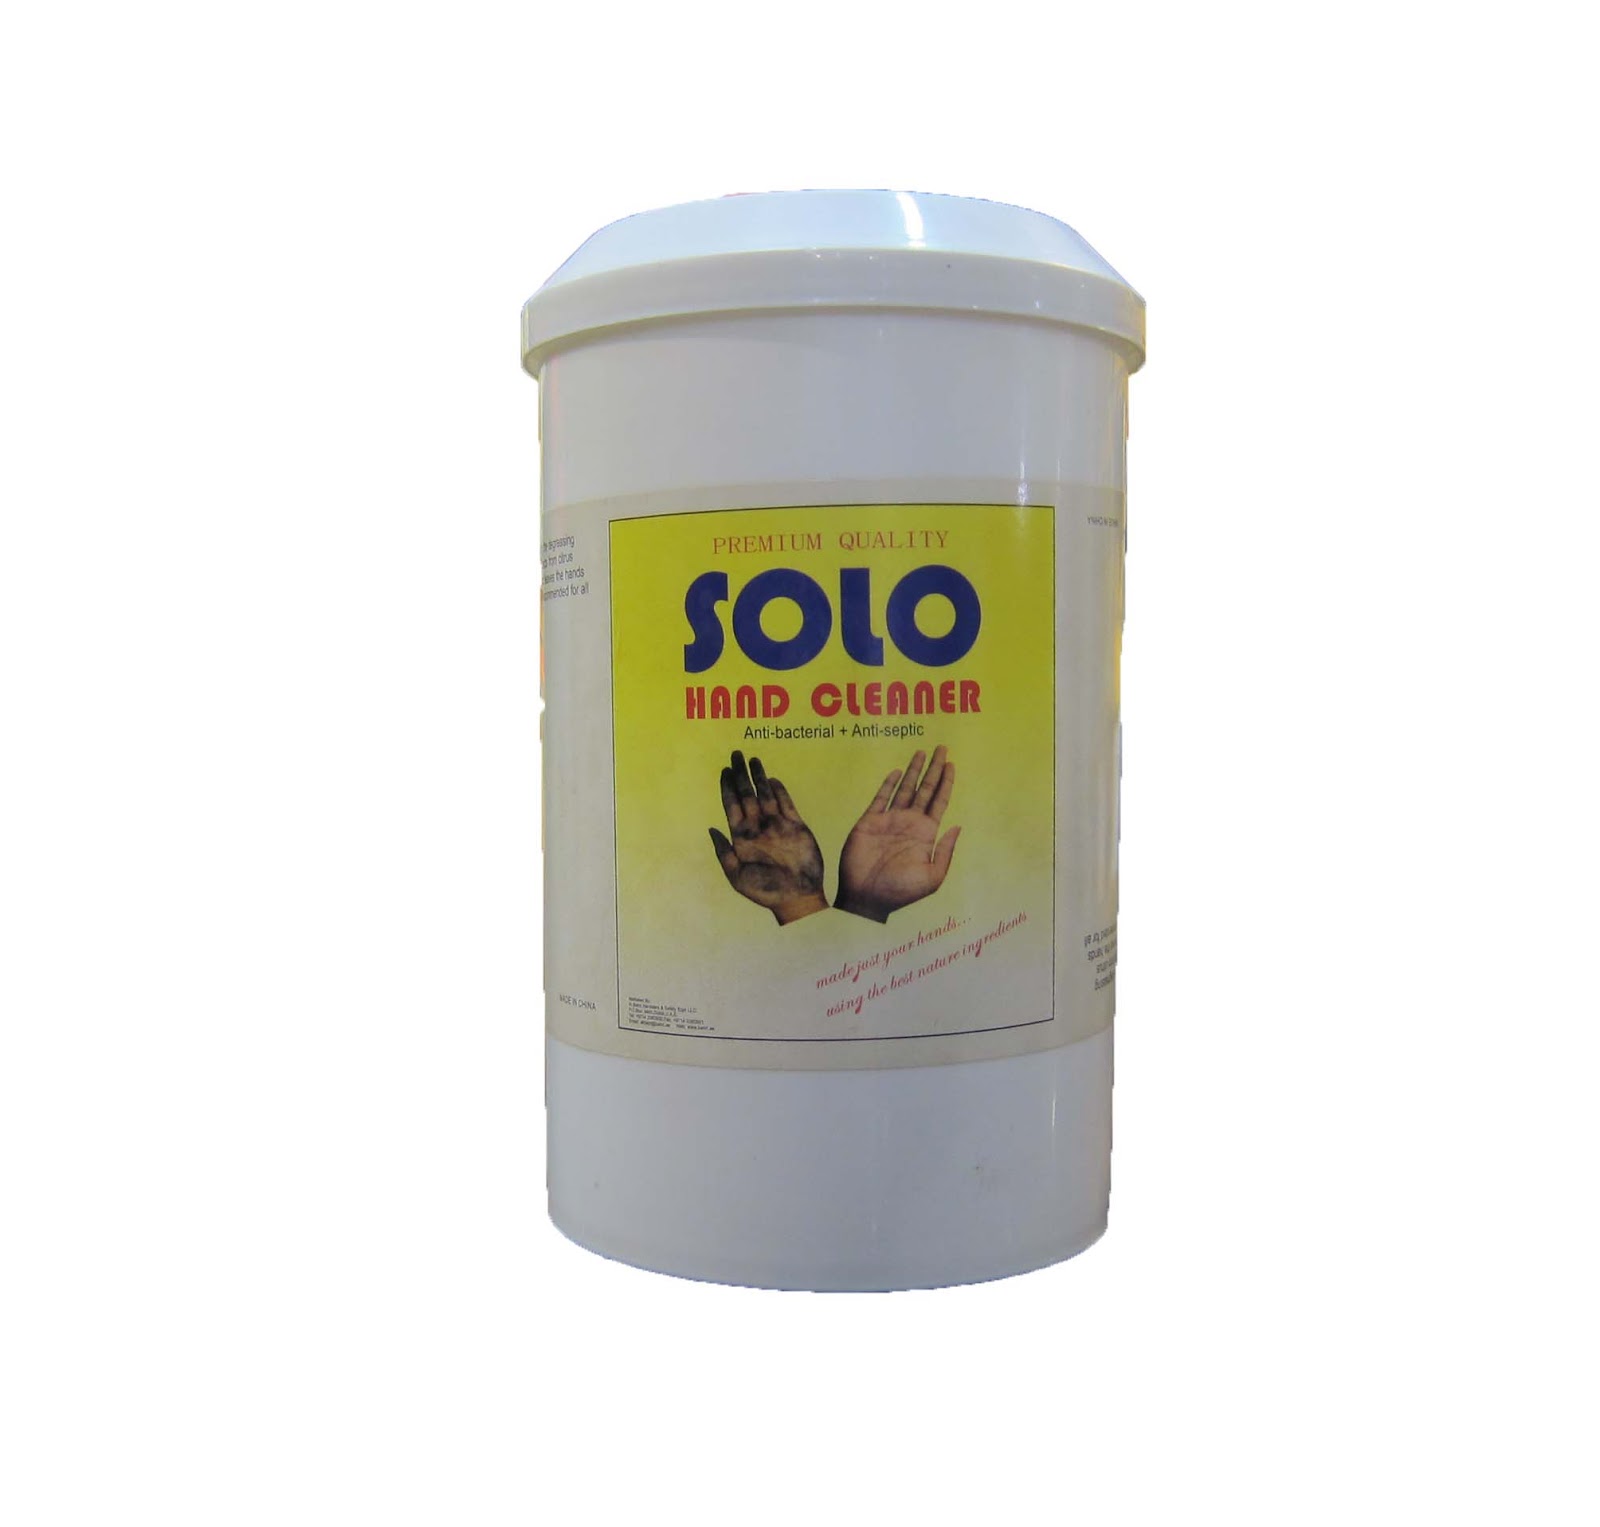  Solo Hand Cleaner - SOLO - ALCOHOL HAND GEL SANITISER